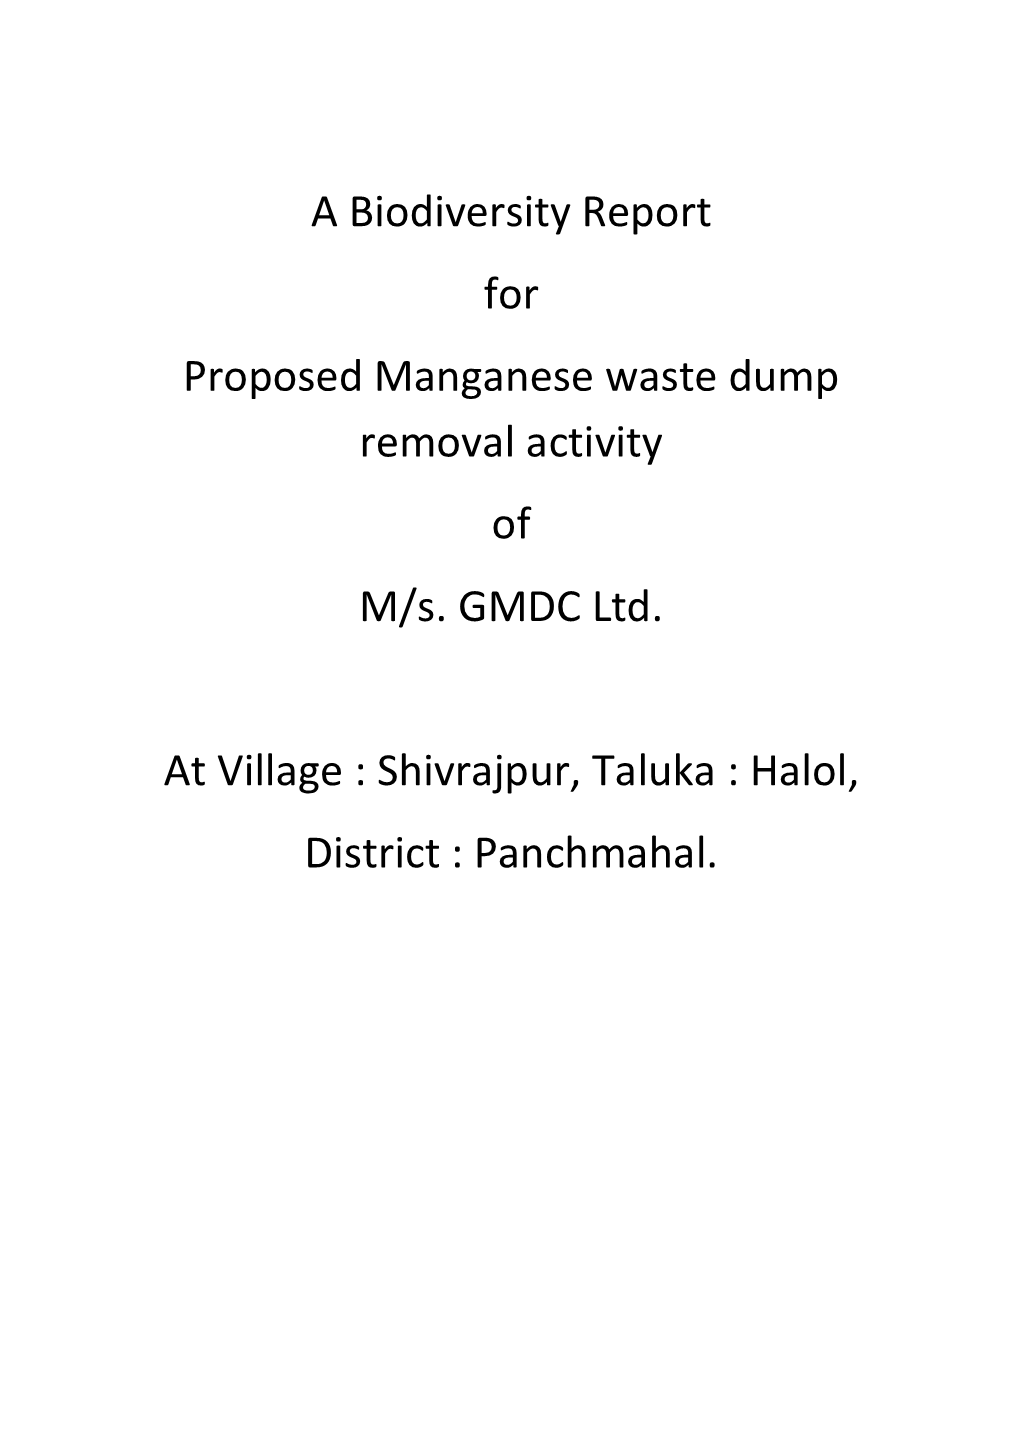 A Biodiversity Report for Proposed Manganese Waste Dump Removal Activity of M/S. GMDC Ltd. at Village : Shivrajpur, Taluka